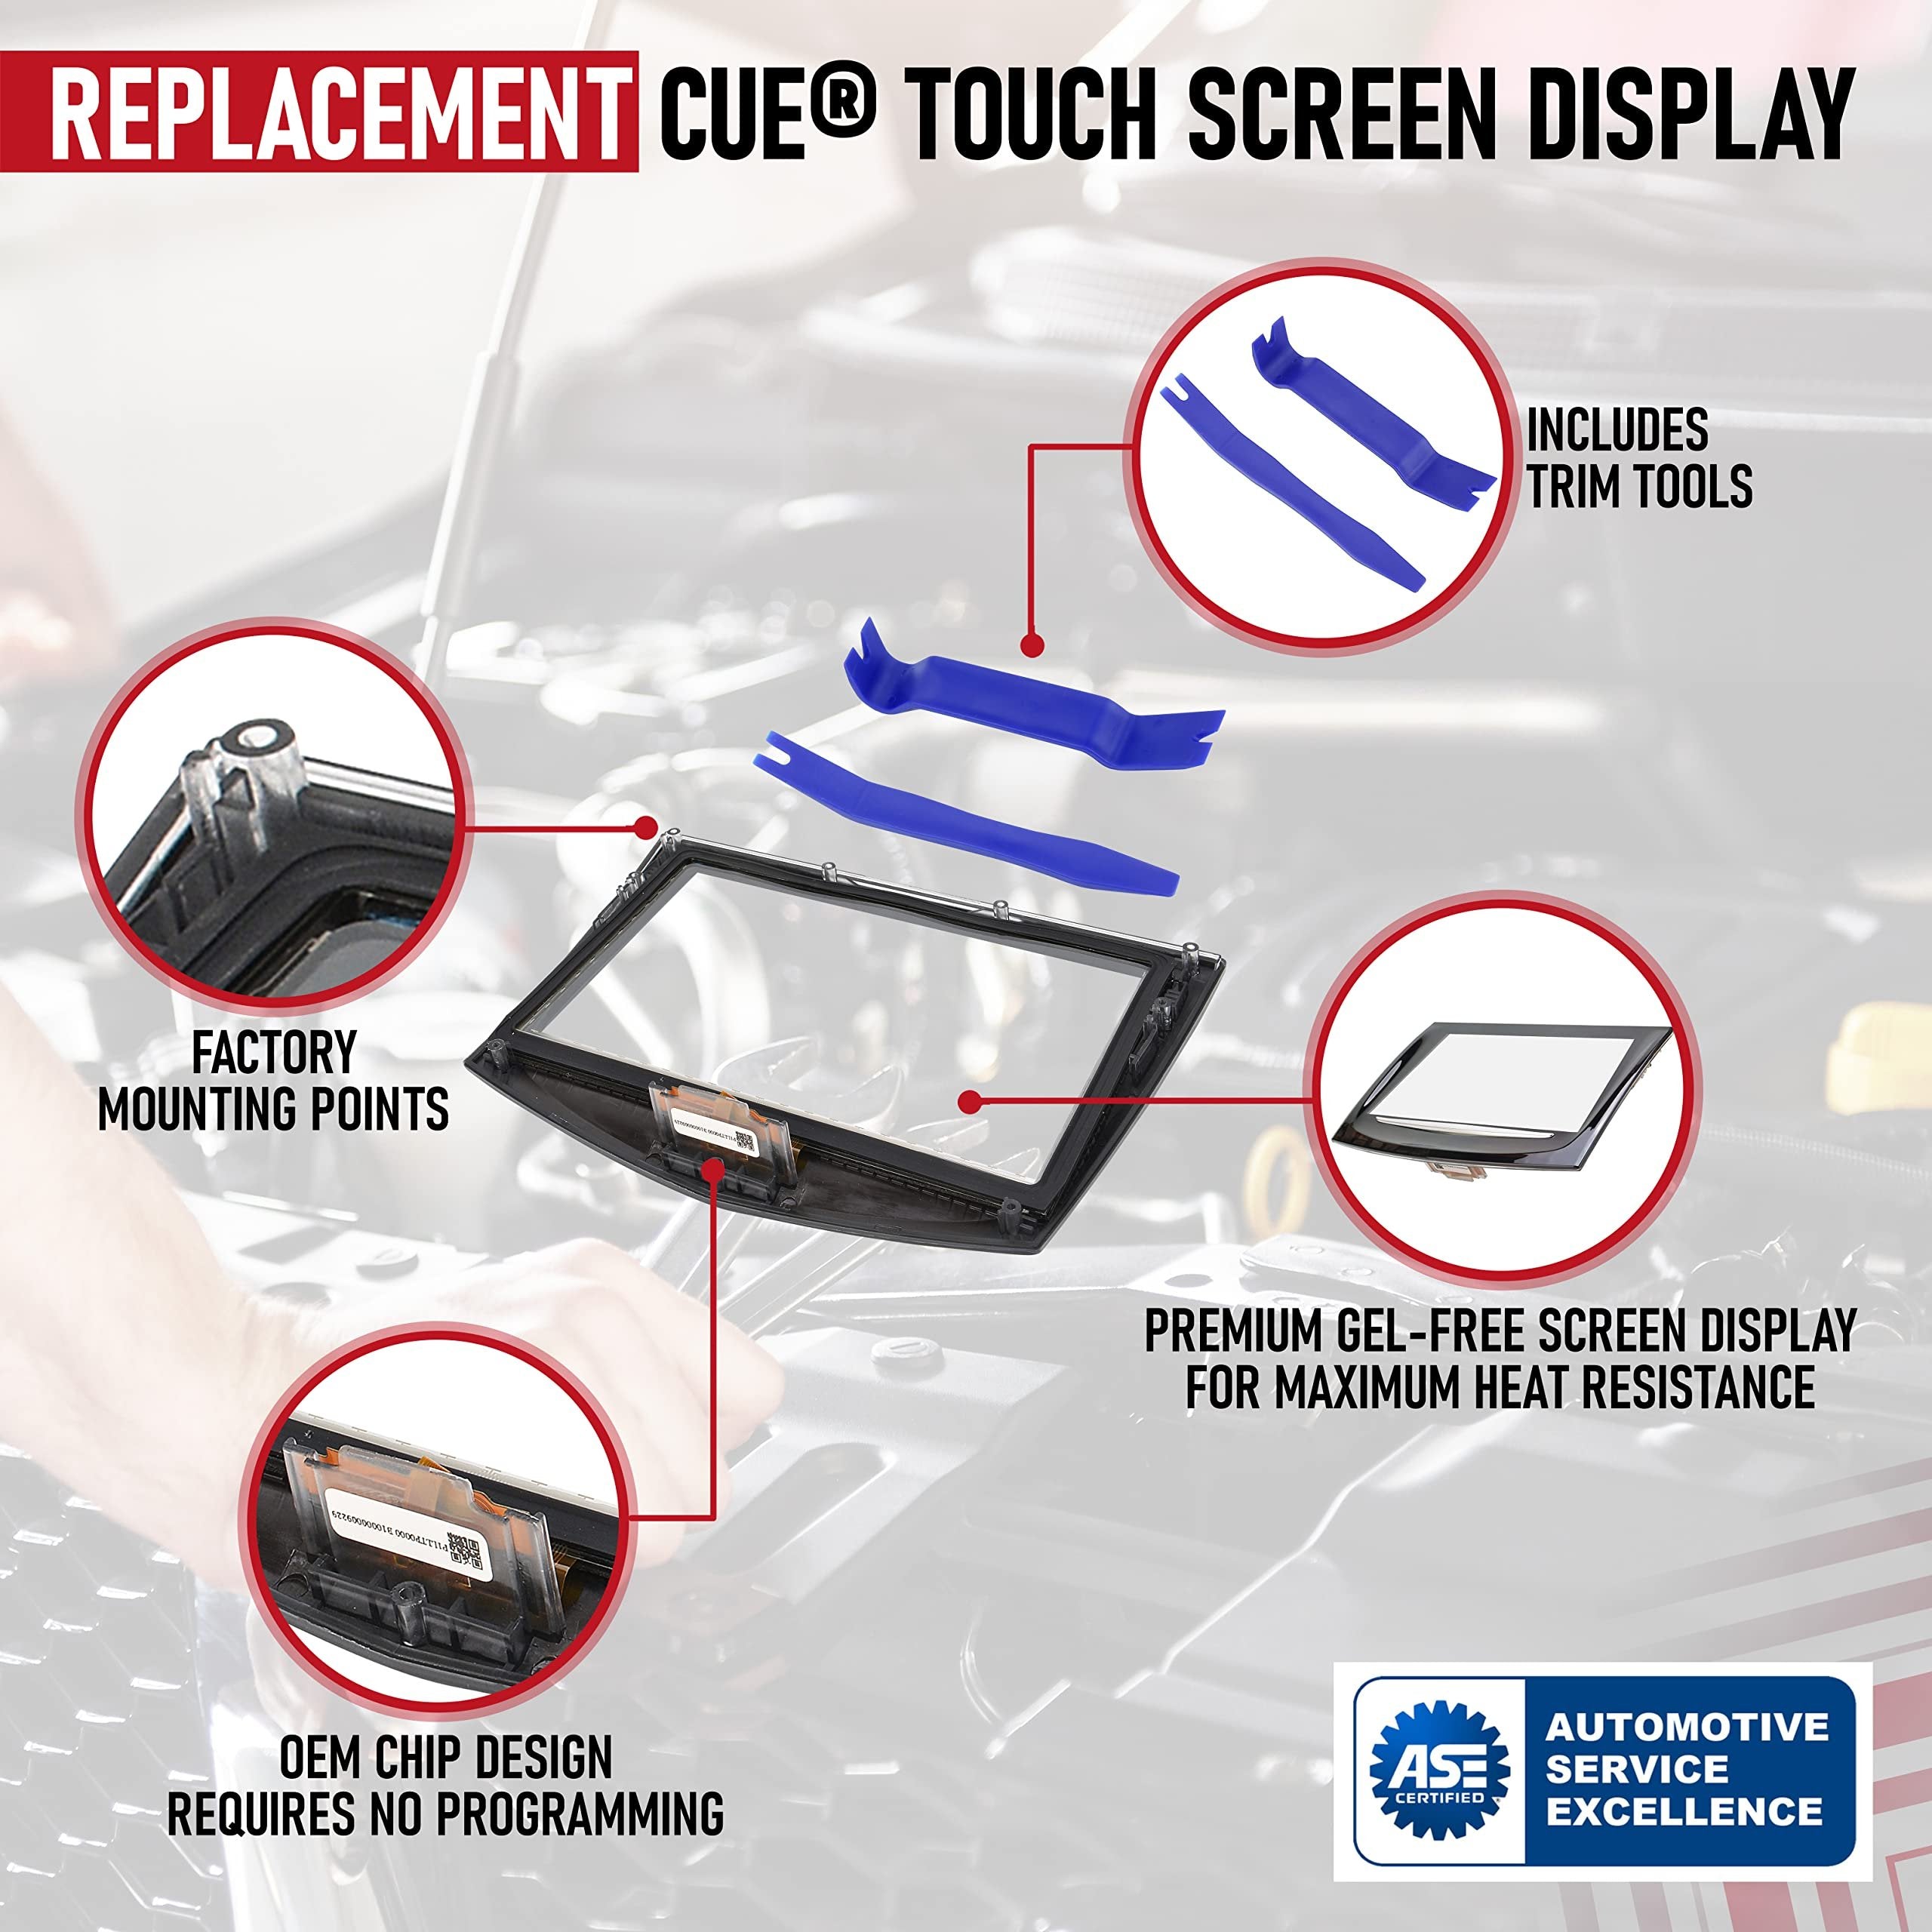 New Replacement CUE Touch Display for Cadillac - Size [insert size if not in original title] - Gel-Free Infotainment Screen - Fits ATS, CTS, ELR, Escalade, SRX, XTS - Replaces 22980208, 22986276